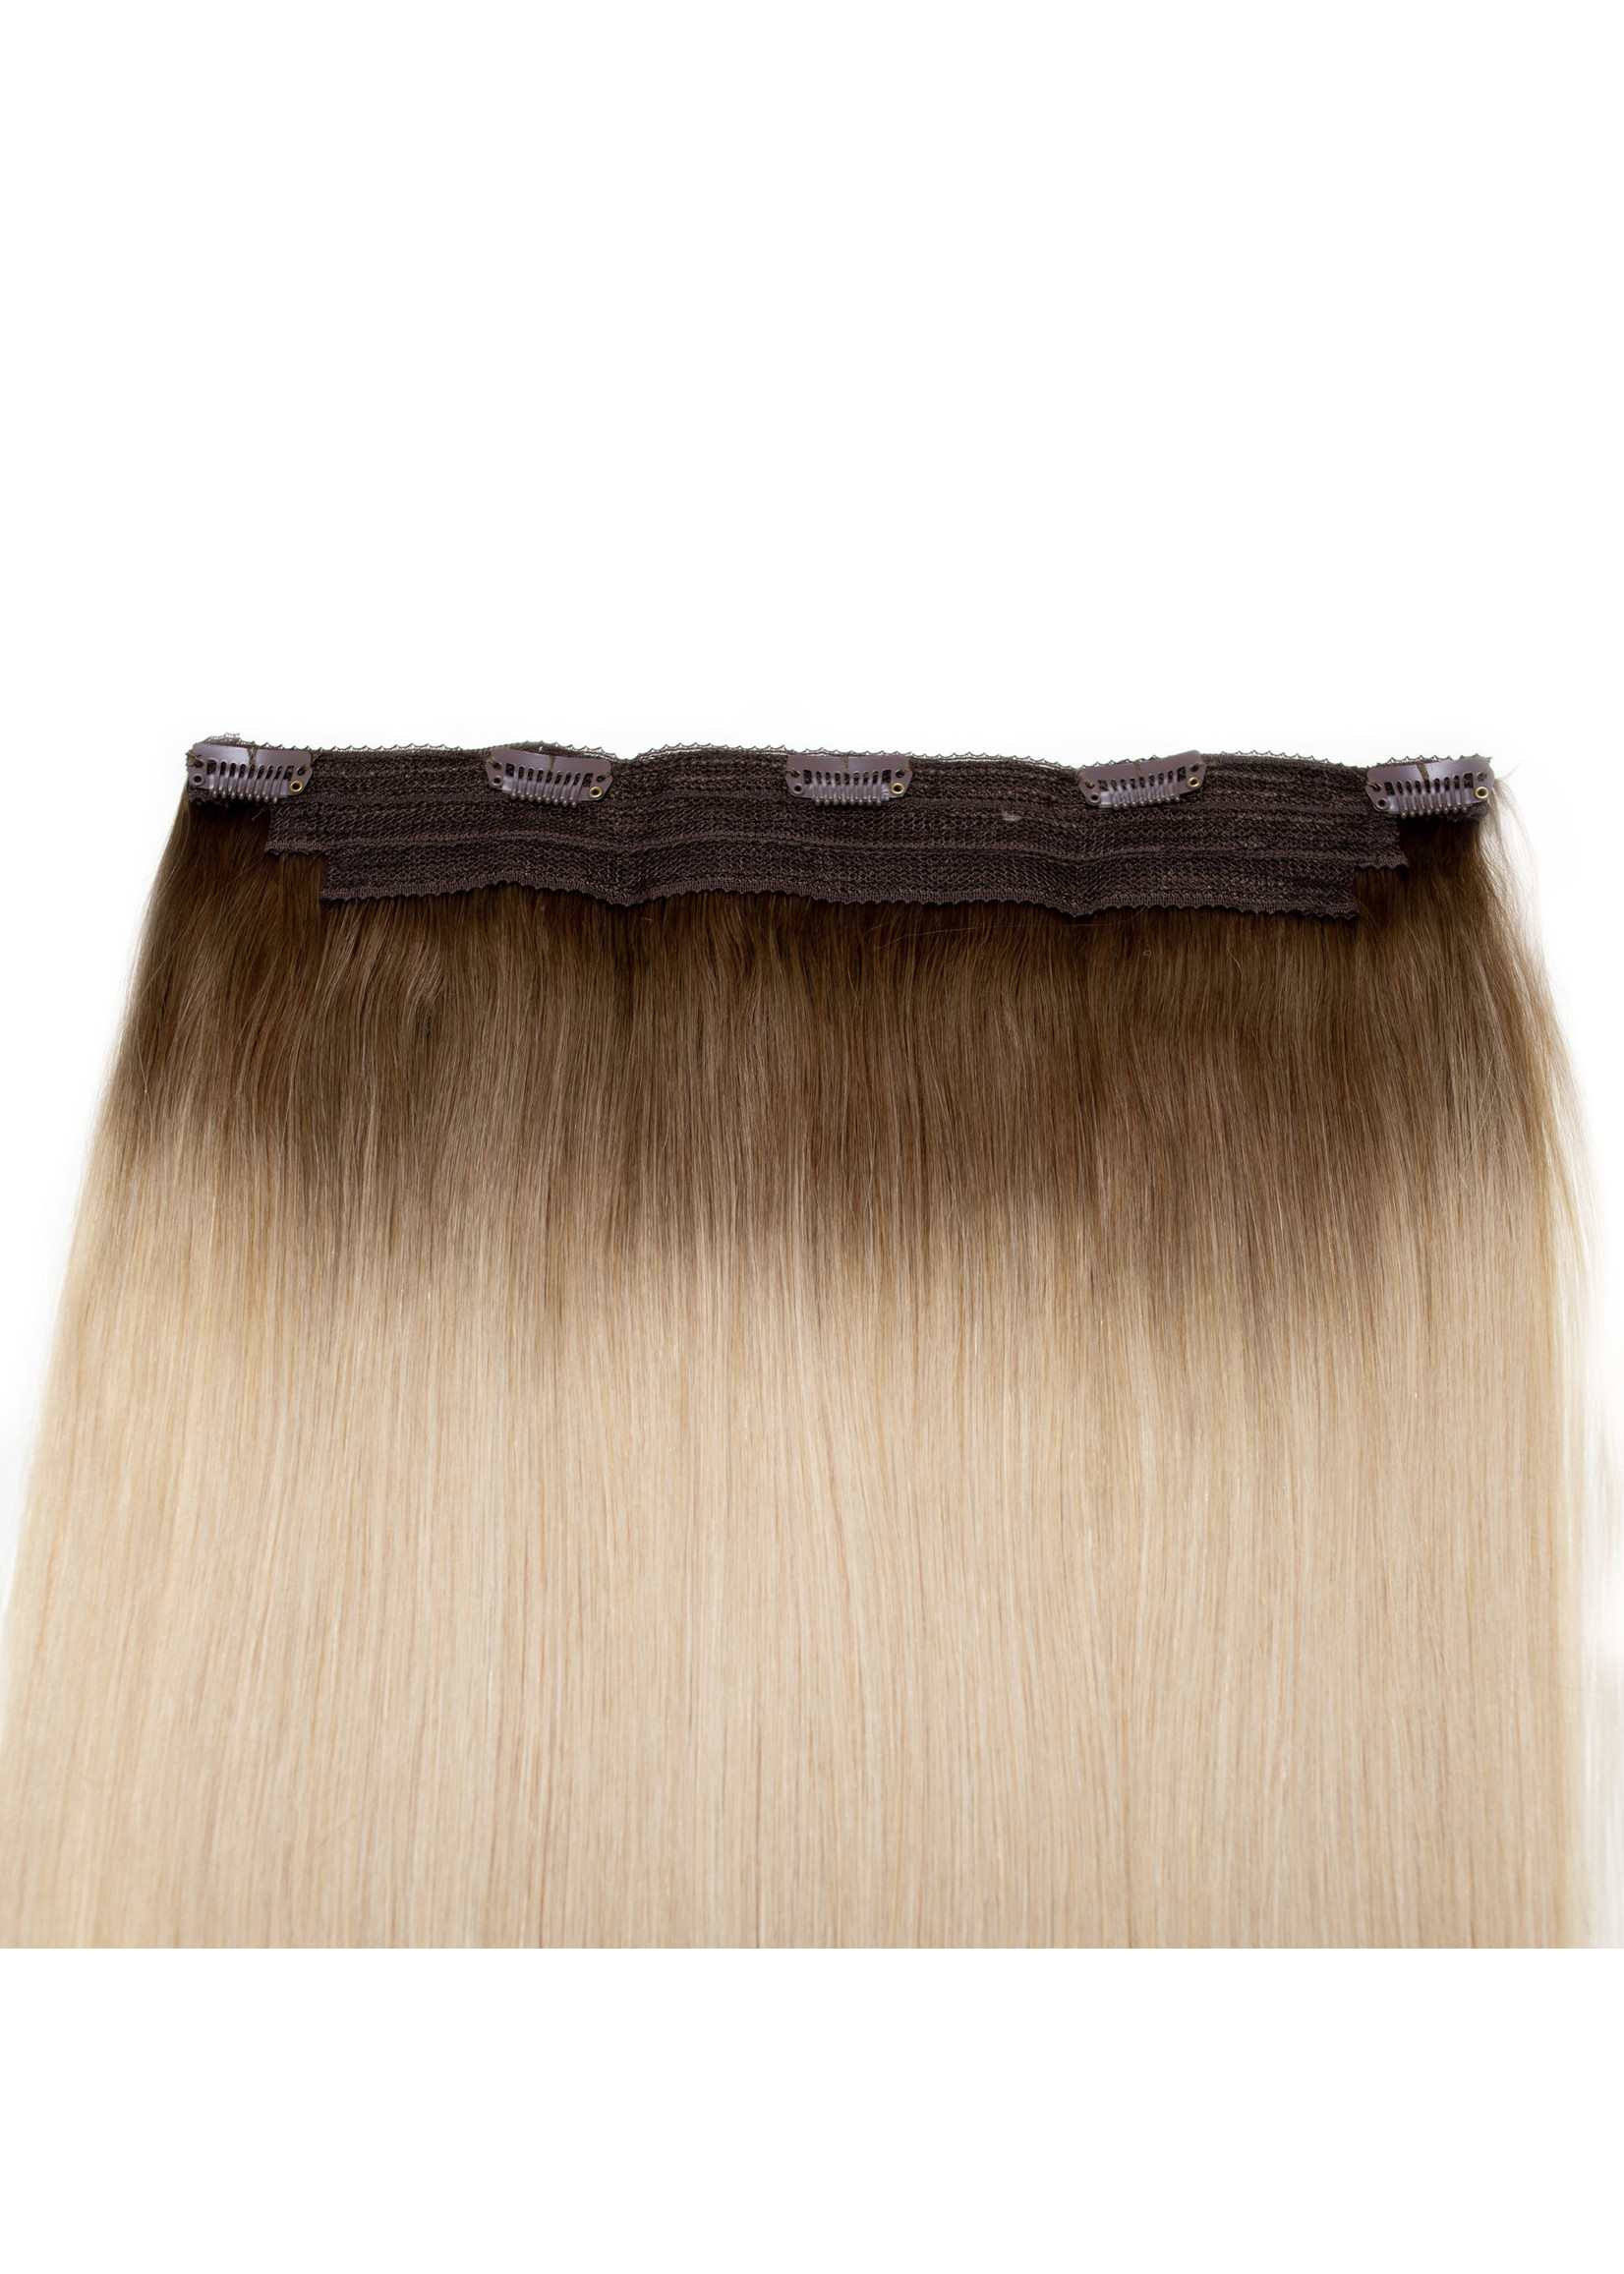 Seamless1 Seamless1 Human Hair Clip-in 1pc Hair Extensions 21.5 Inches - CoffeenCream Balayage